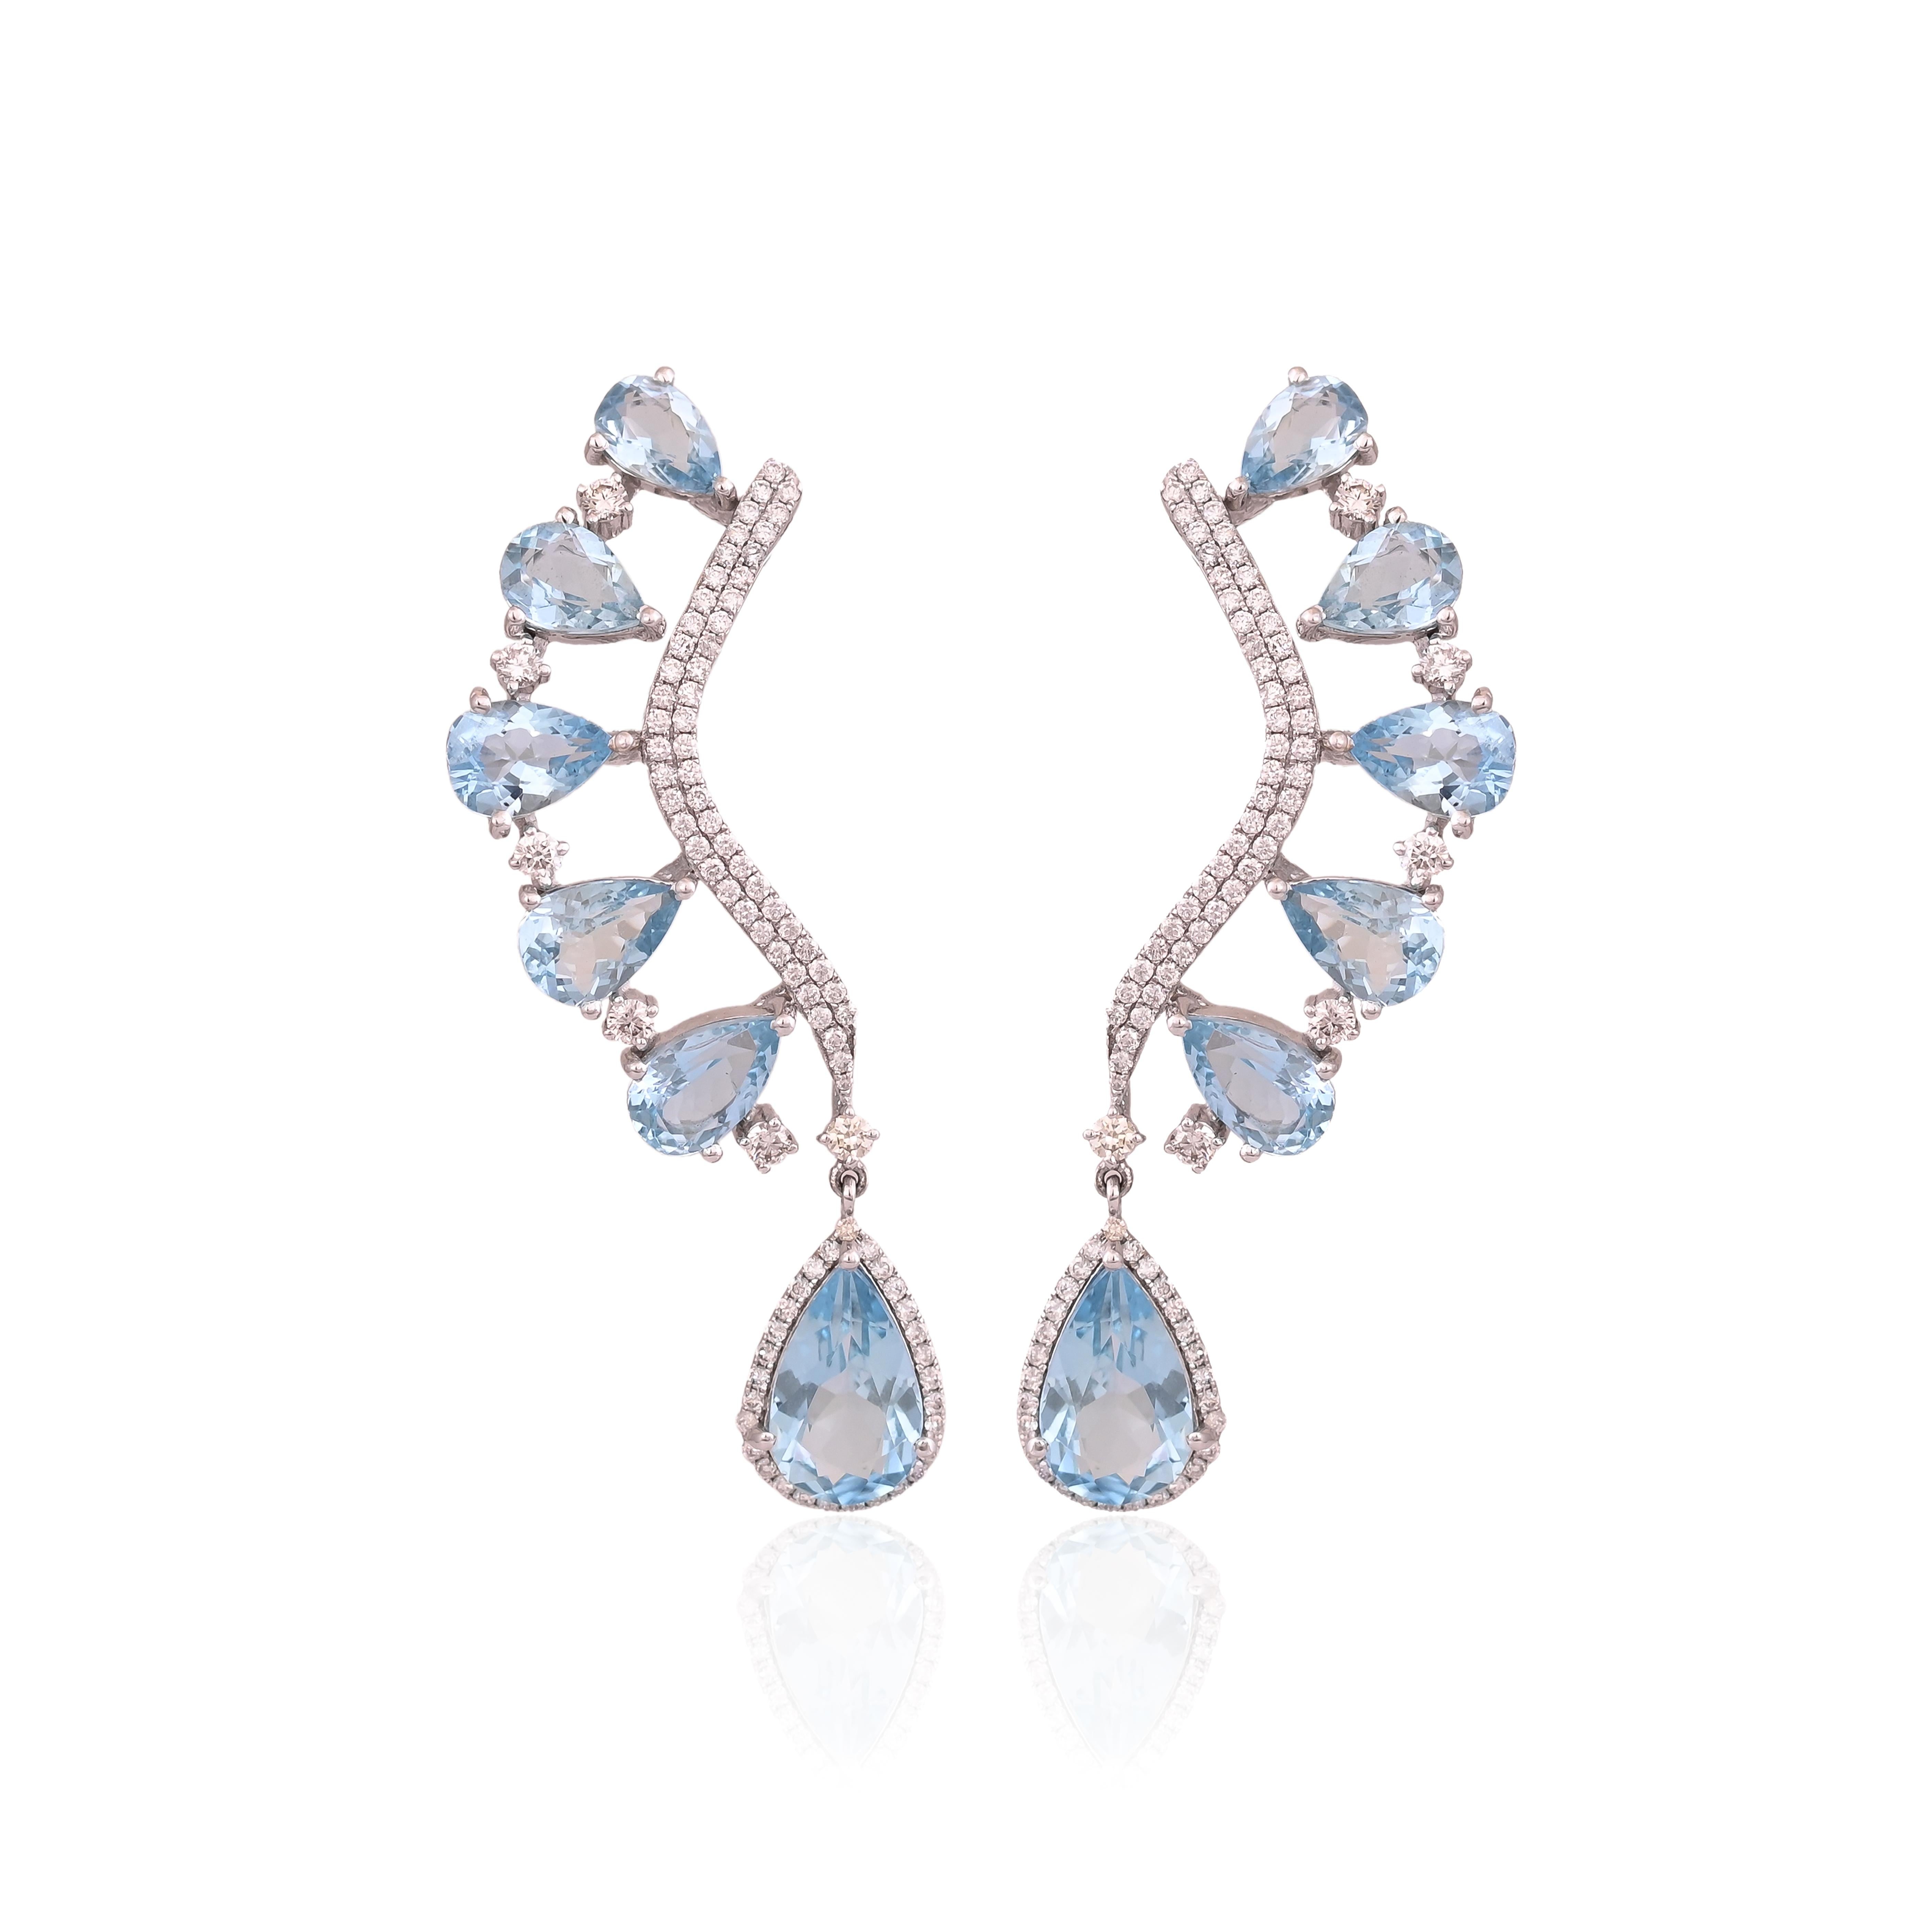 A very gorgeous and modern, Aquamarine Chandelier Earrings set in 18K White Gold & Diamonds. The weight of the Aquamarine is 16.63 carats. The Diamonds weight is 2.06 carats. Net 18K White Gold weight is 18.12 grams. The Gross weight is 21.86 grams.